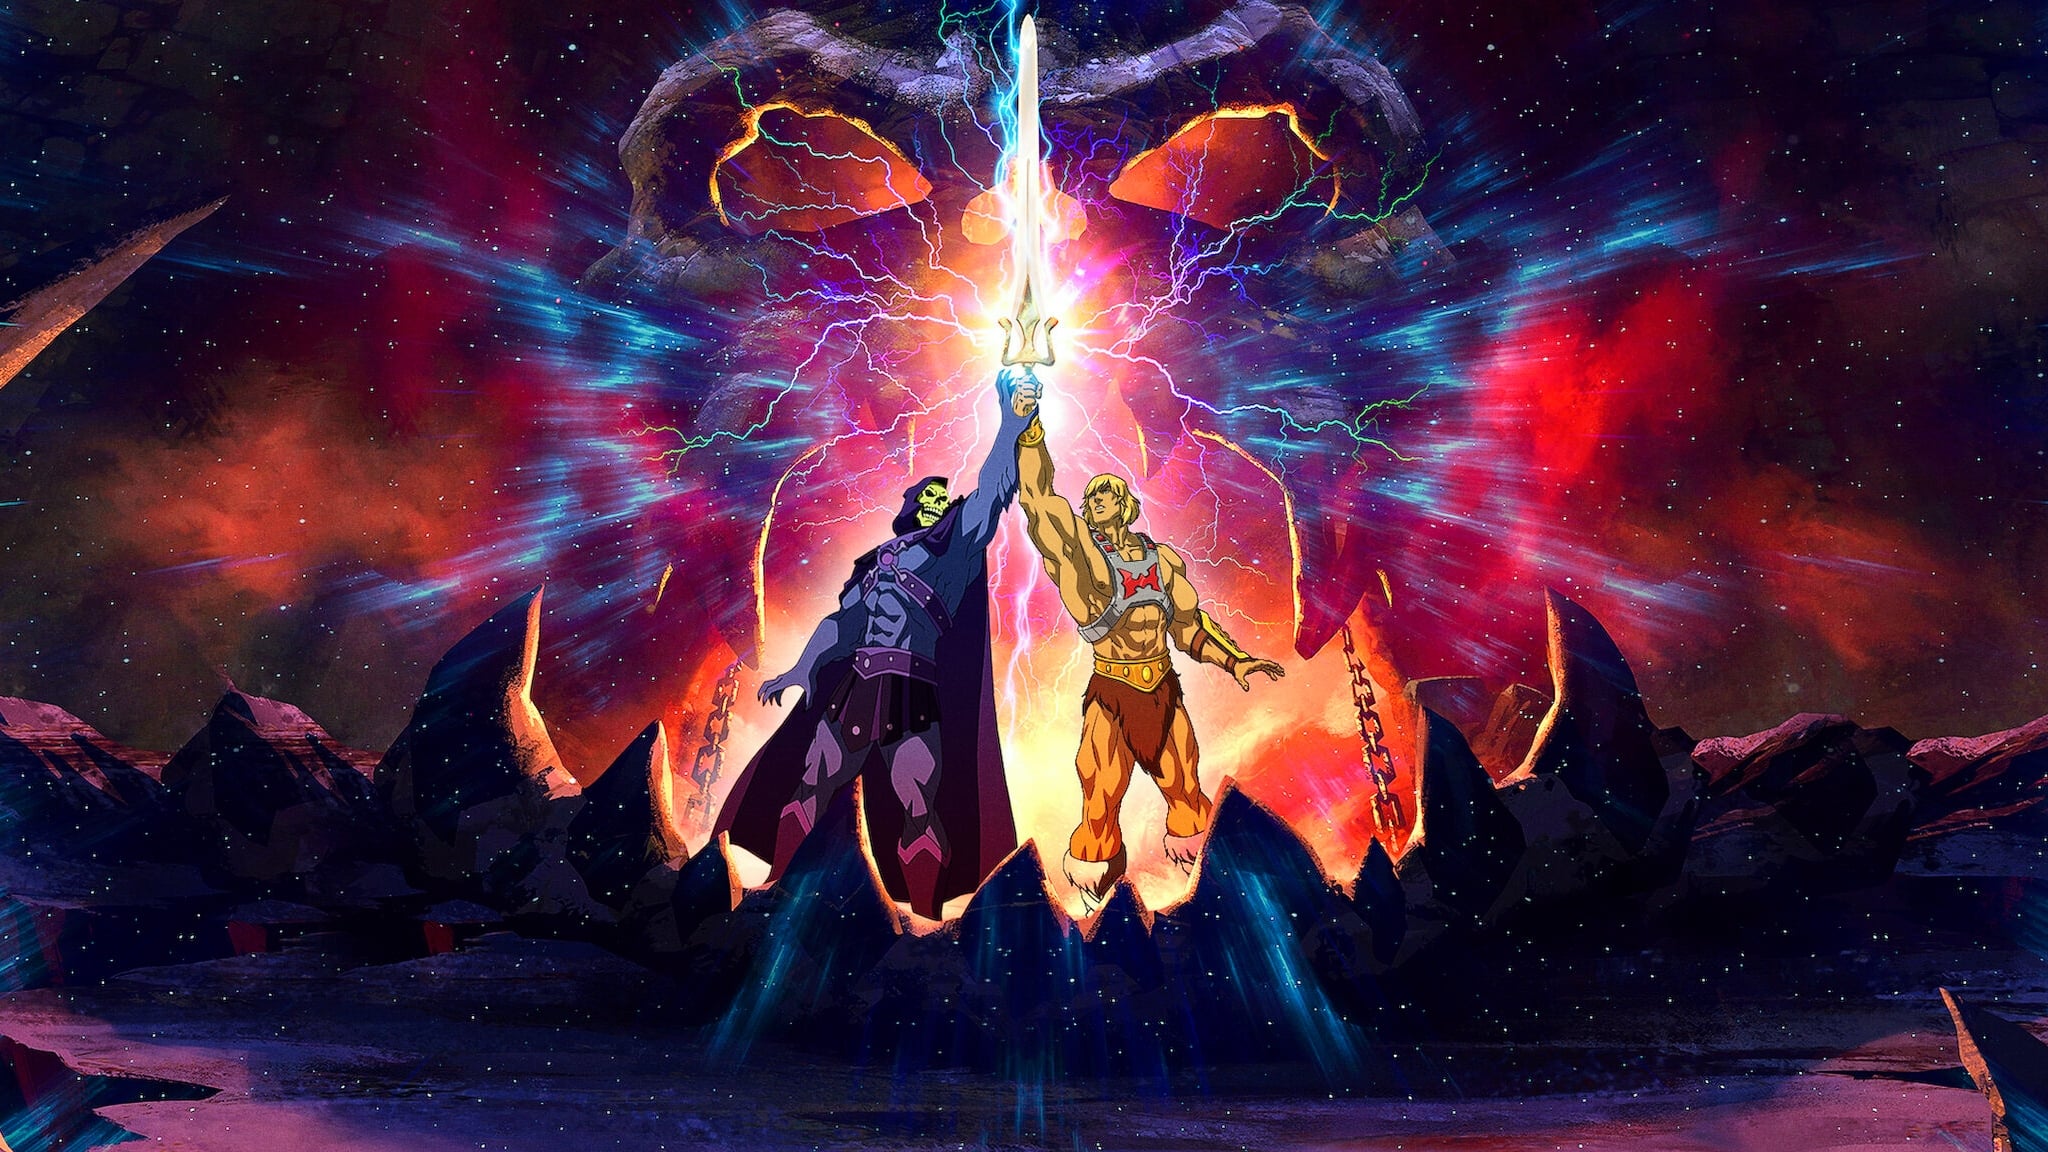 He Man And The Masters Of The Universe He Man Skeletor Cartoon Fantasy Men Clouds Lightning Sword We 2048x1152